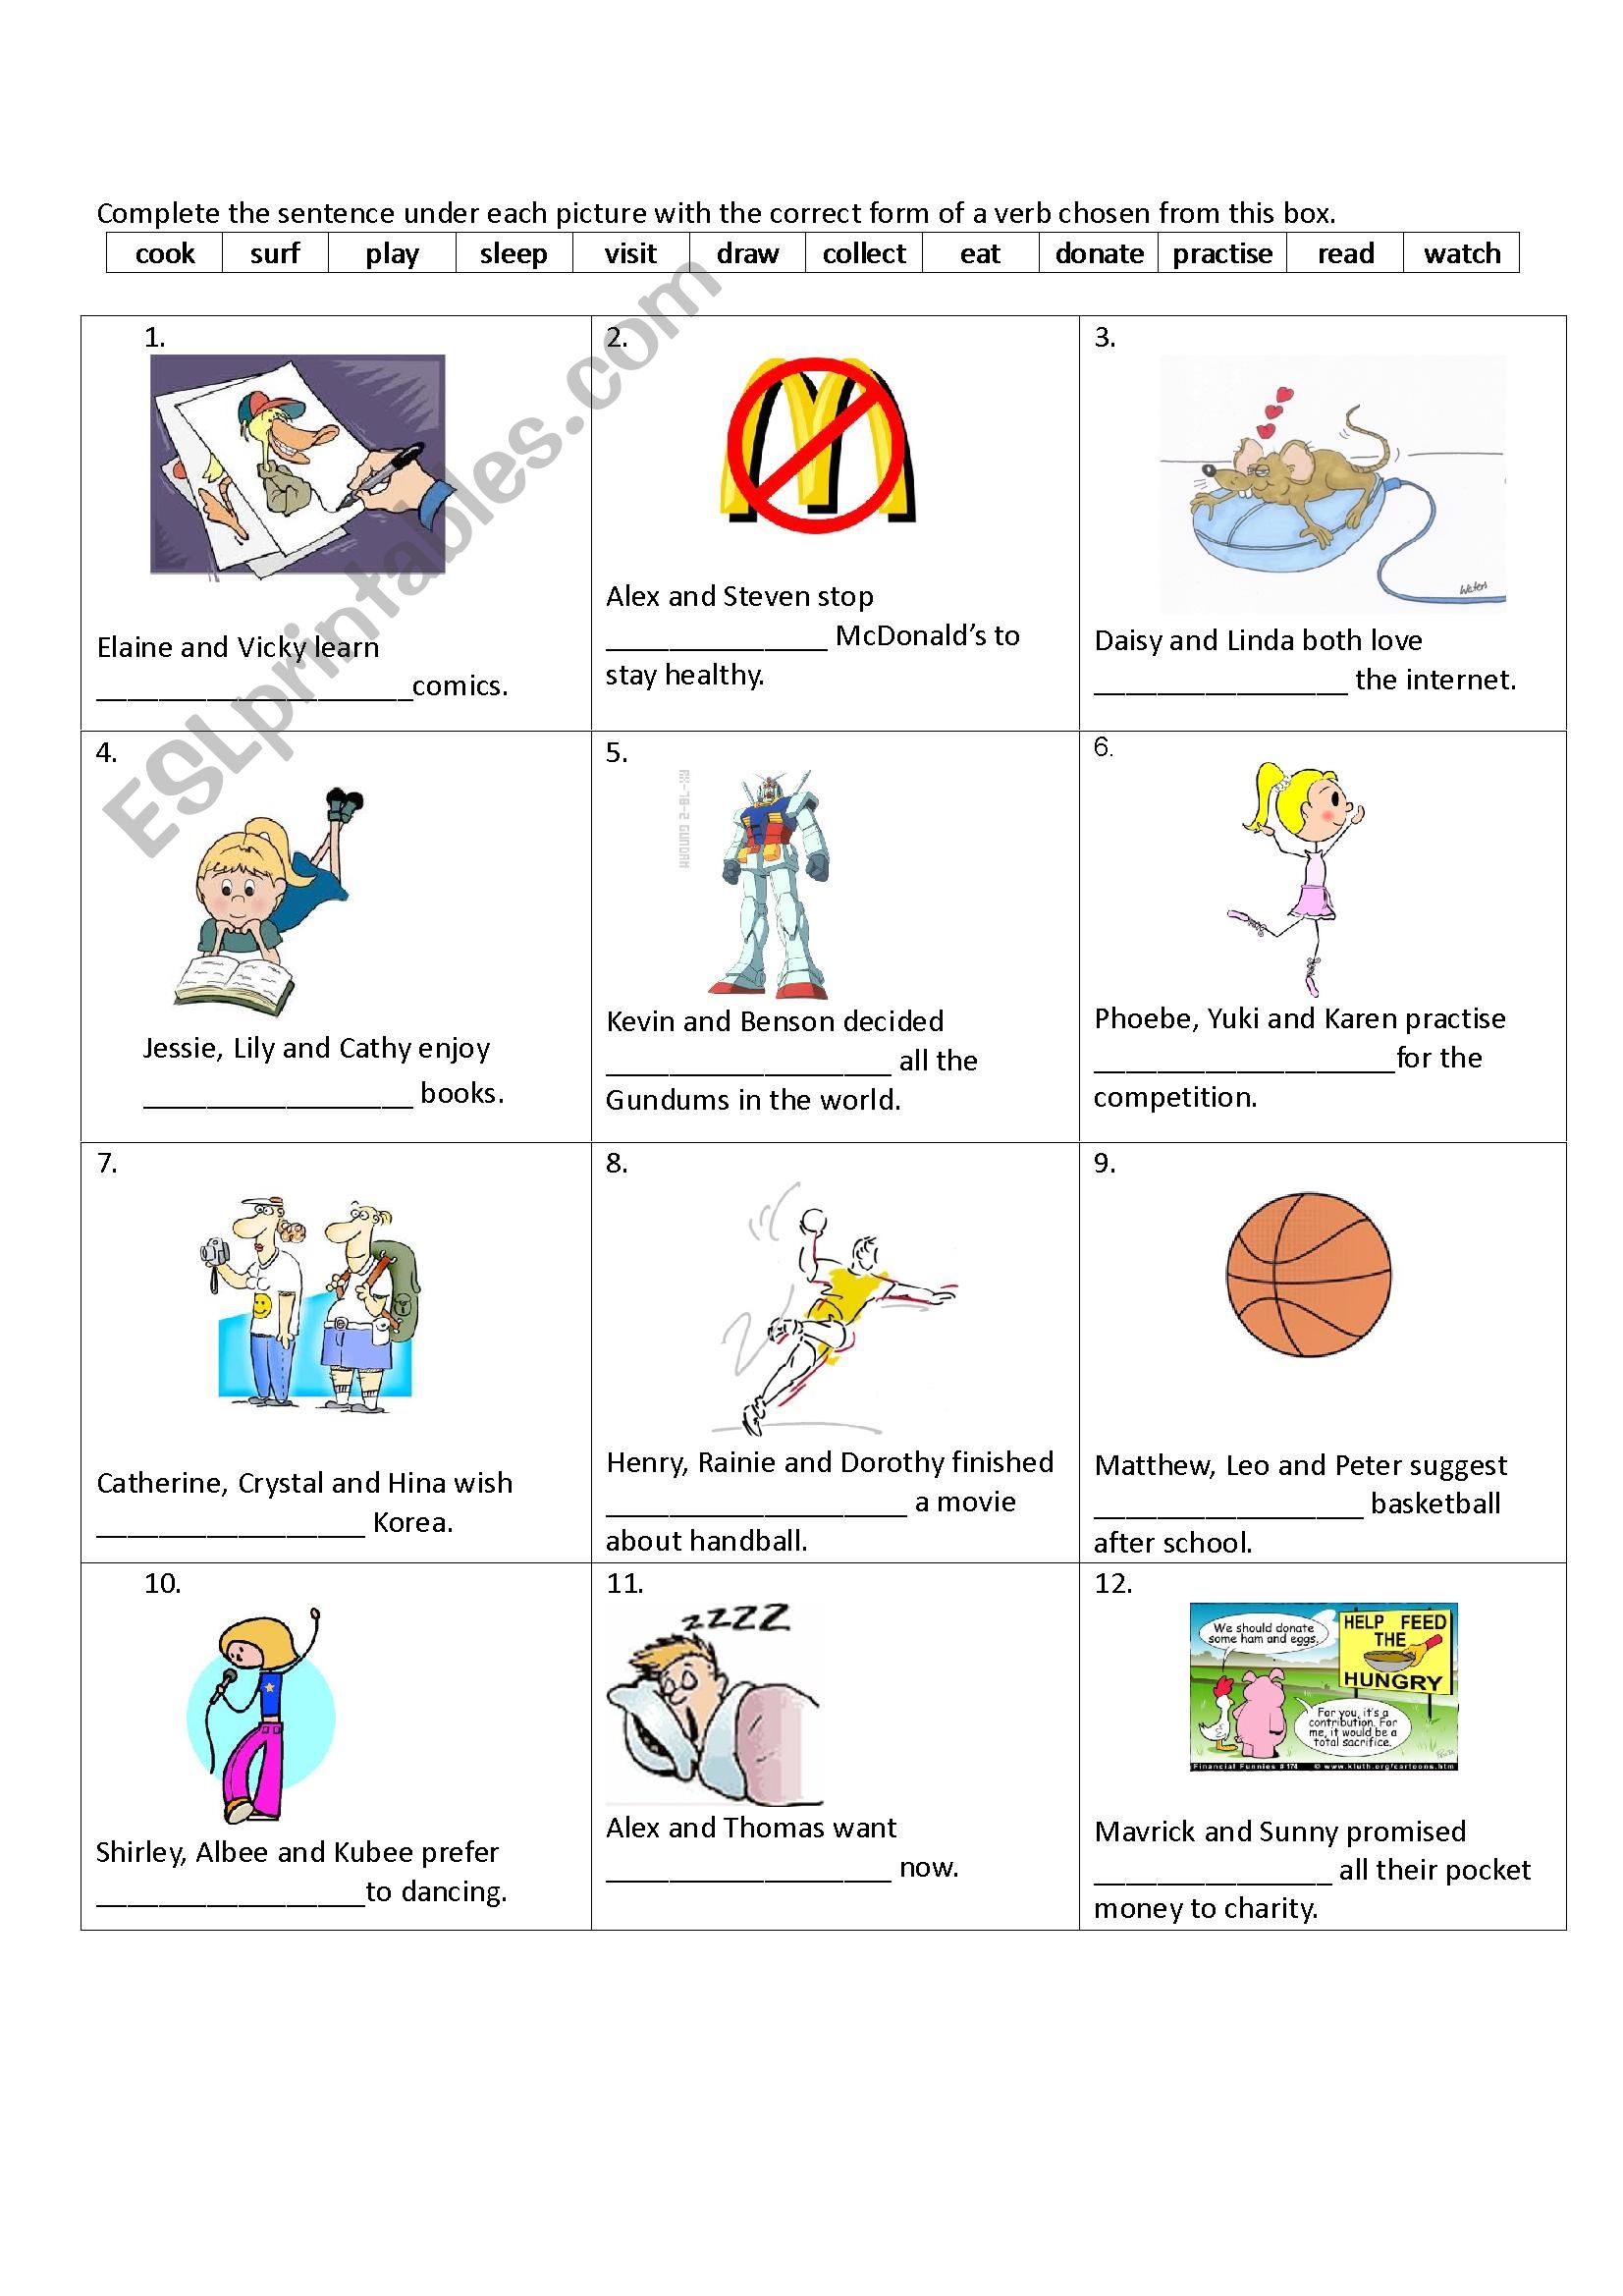 verbs-followed-by-gerund-and-to-infinitive-esl-worksheet-by-vivi2012